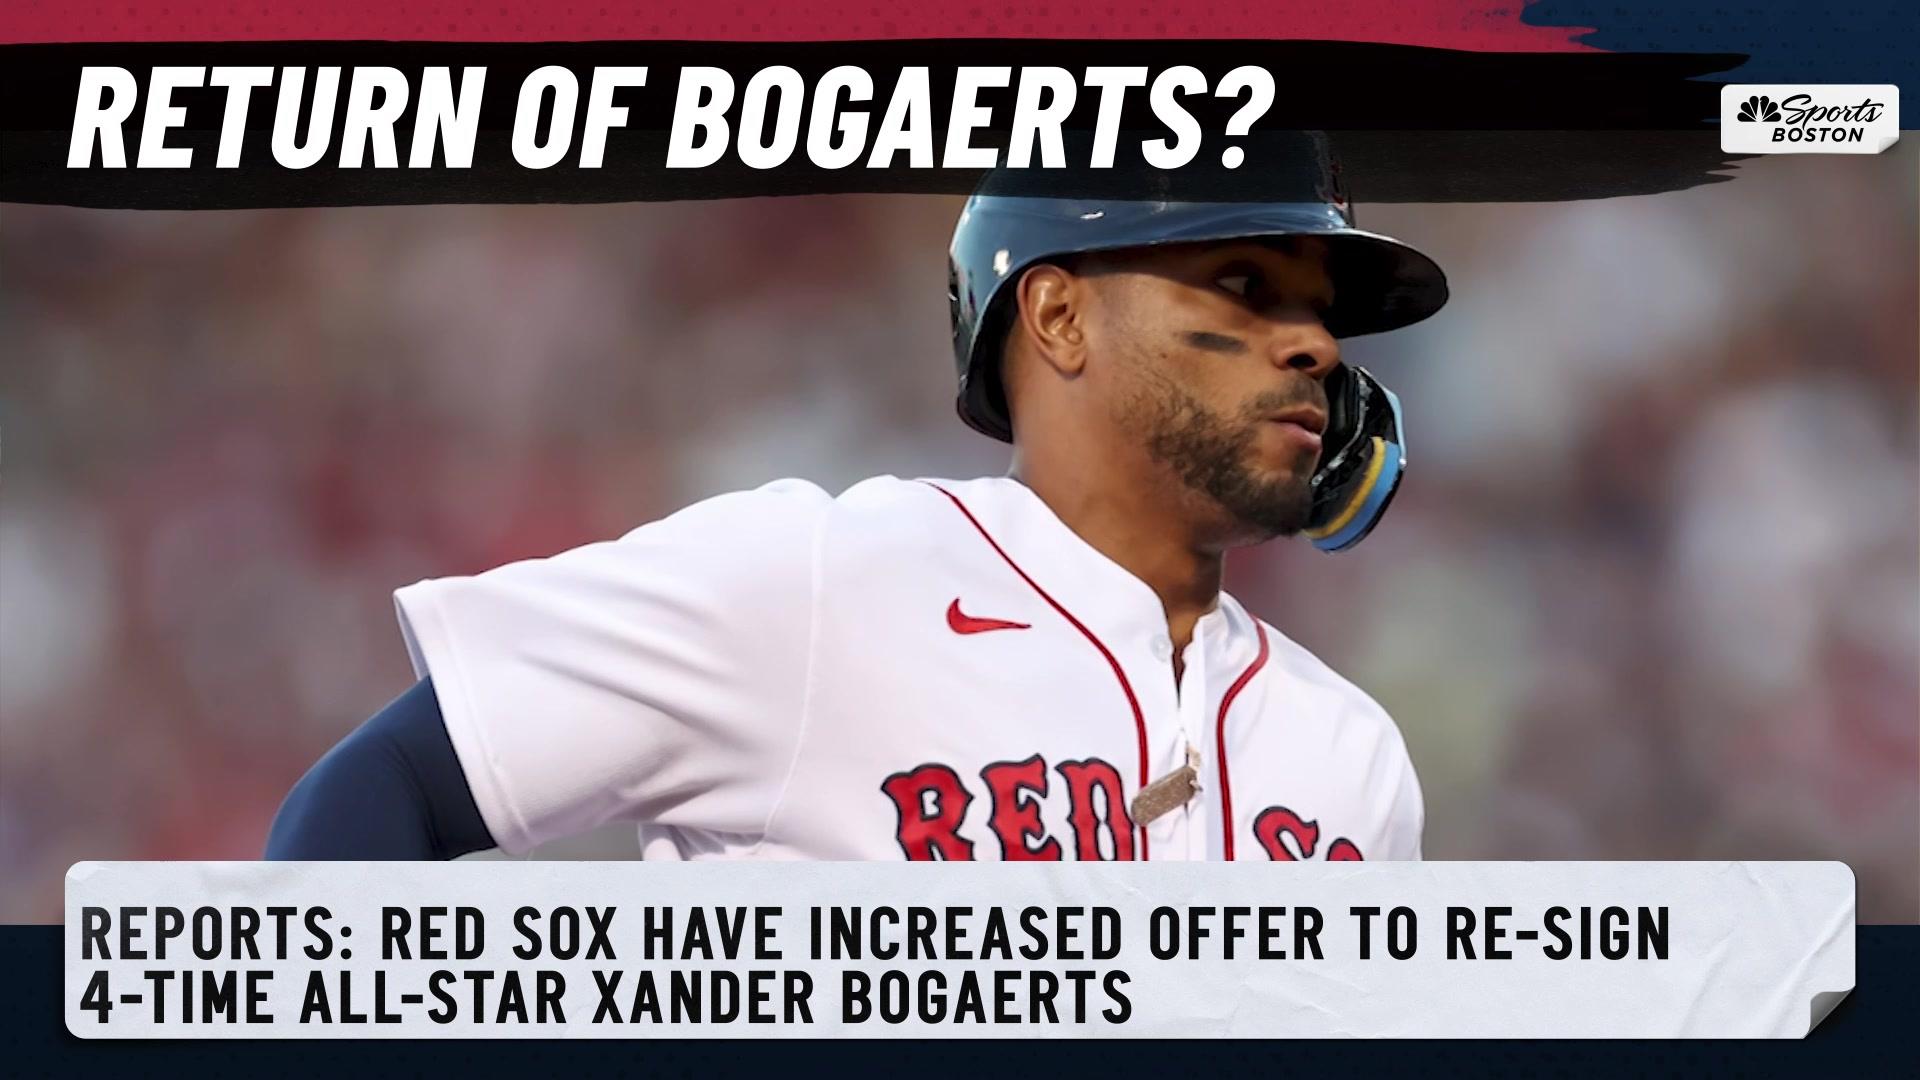 Boston Red Sox Xander Bogaerts is next man up as face of the franchise